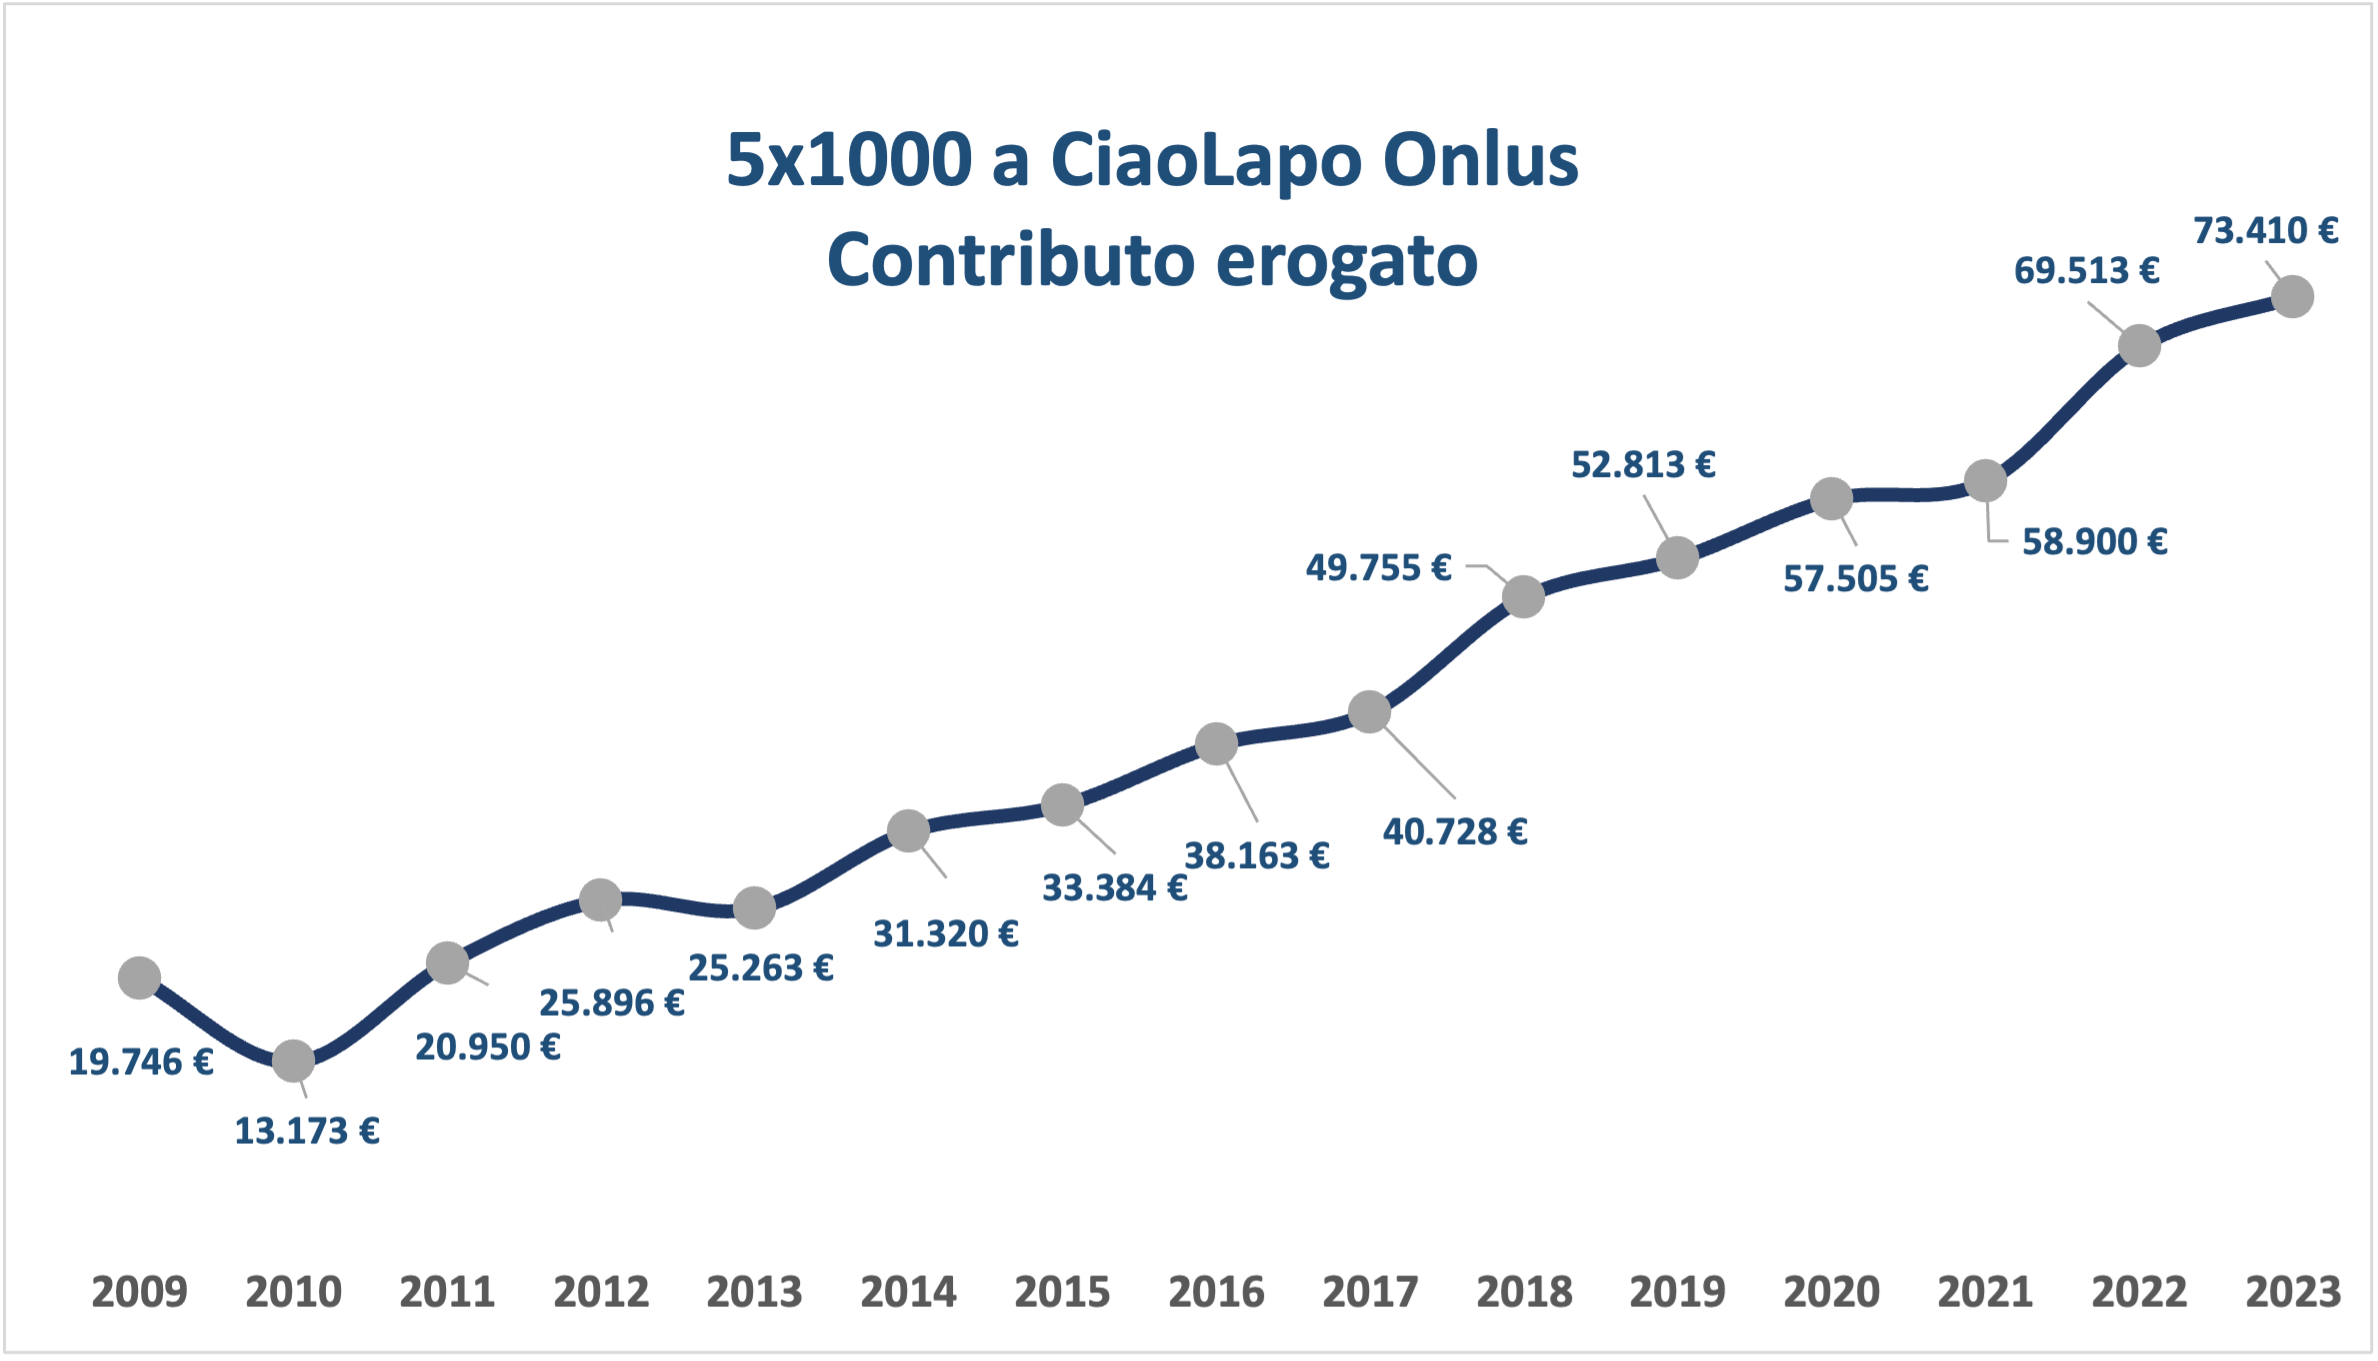 5x1000 trend at CiaoLapo